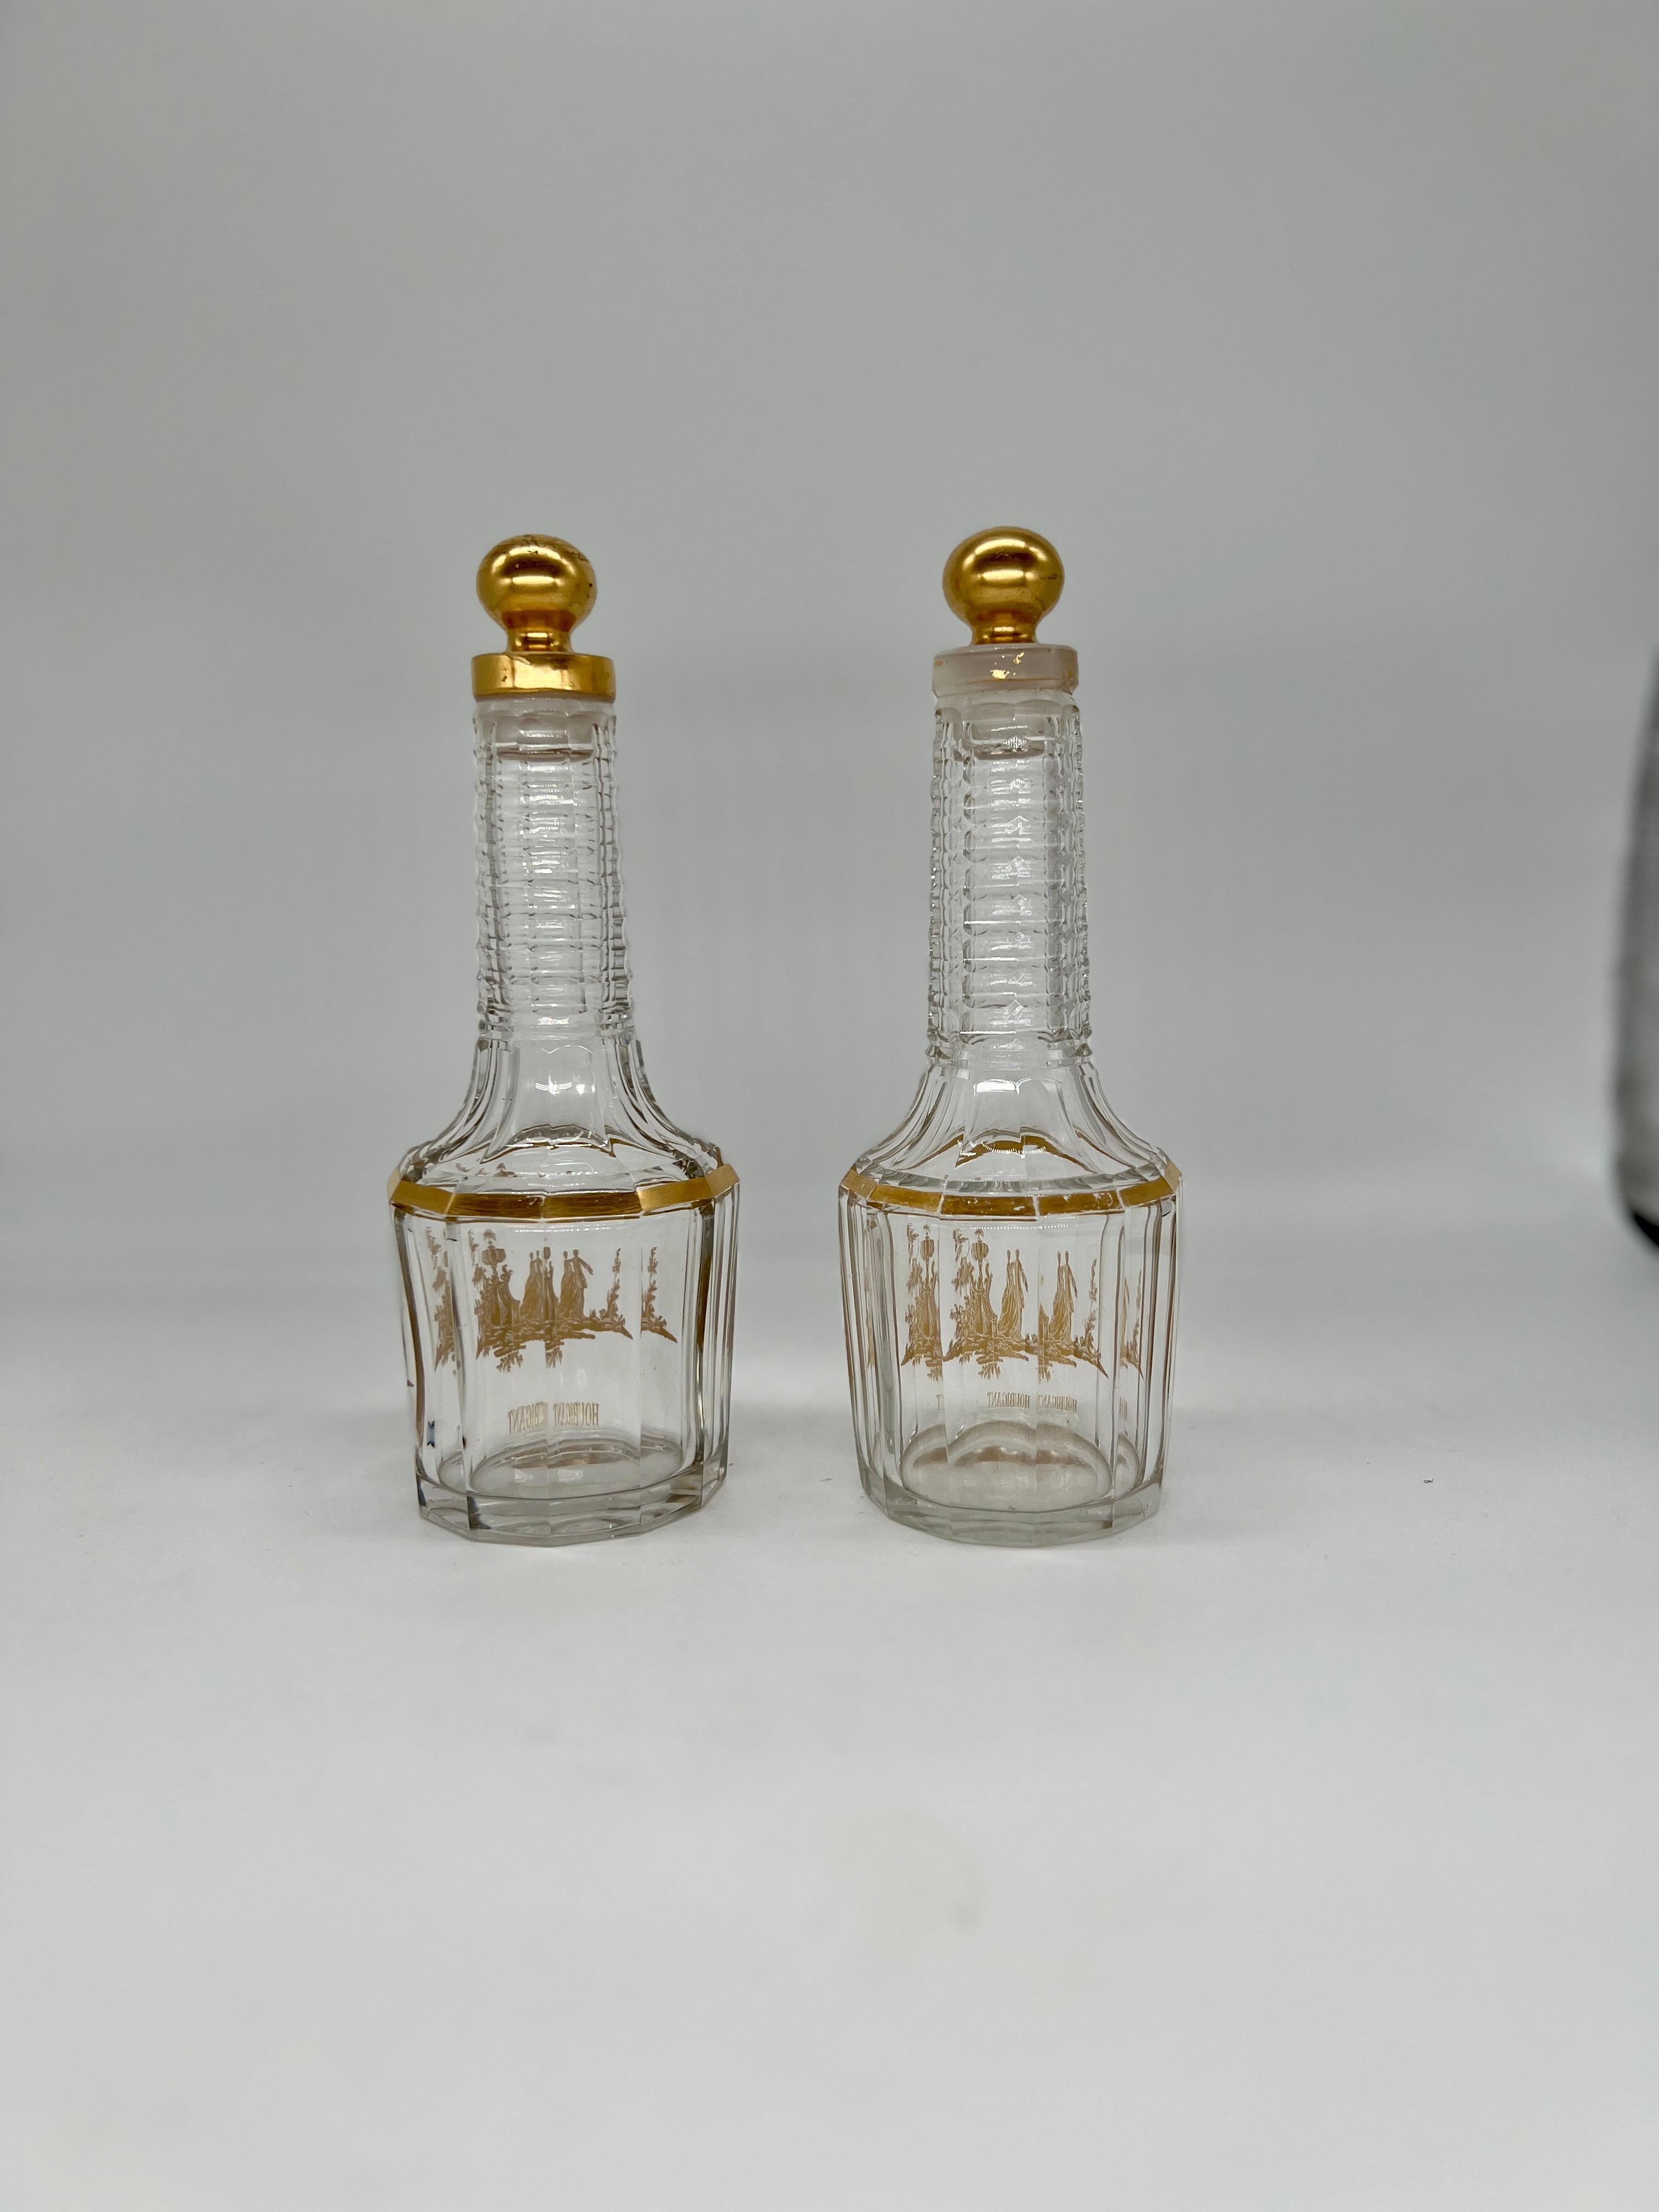 Pair, Antique French Baccarat Houbigant Gilt Crystal Perfume Bottles C. 1920 In Good Condition For Sale In Atlanta, GA